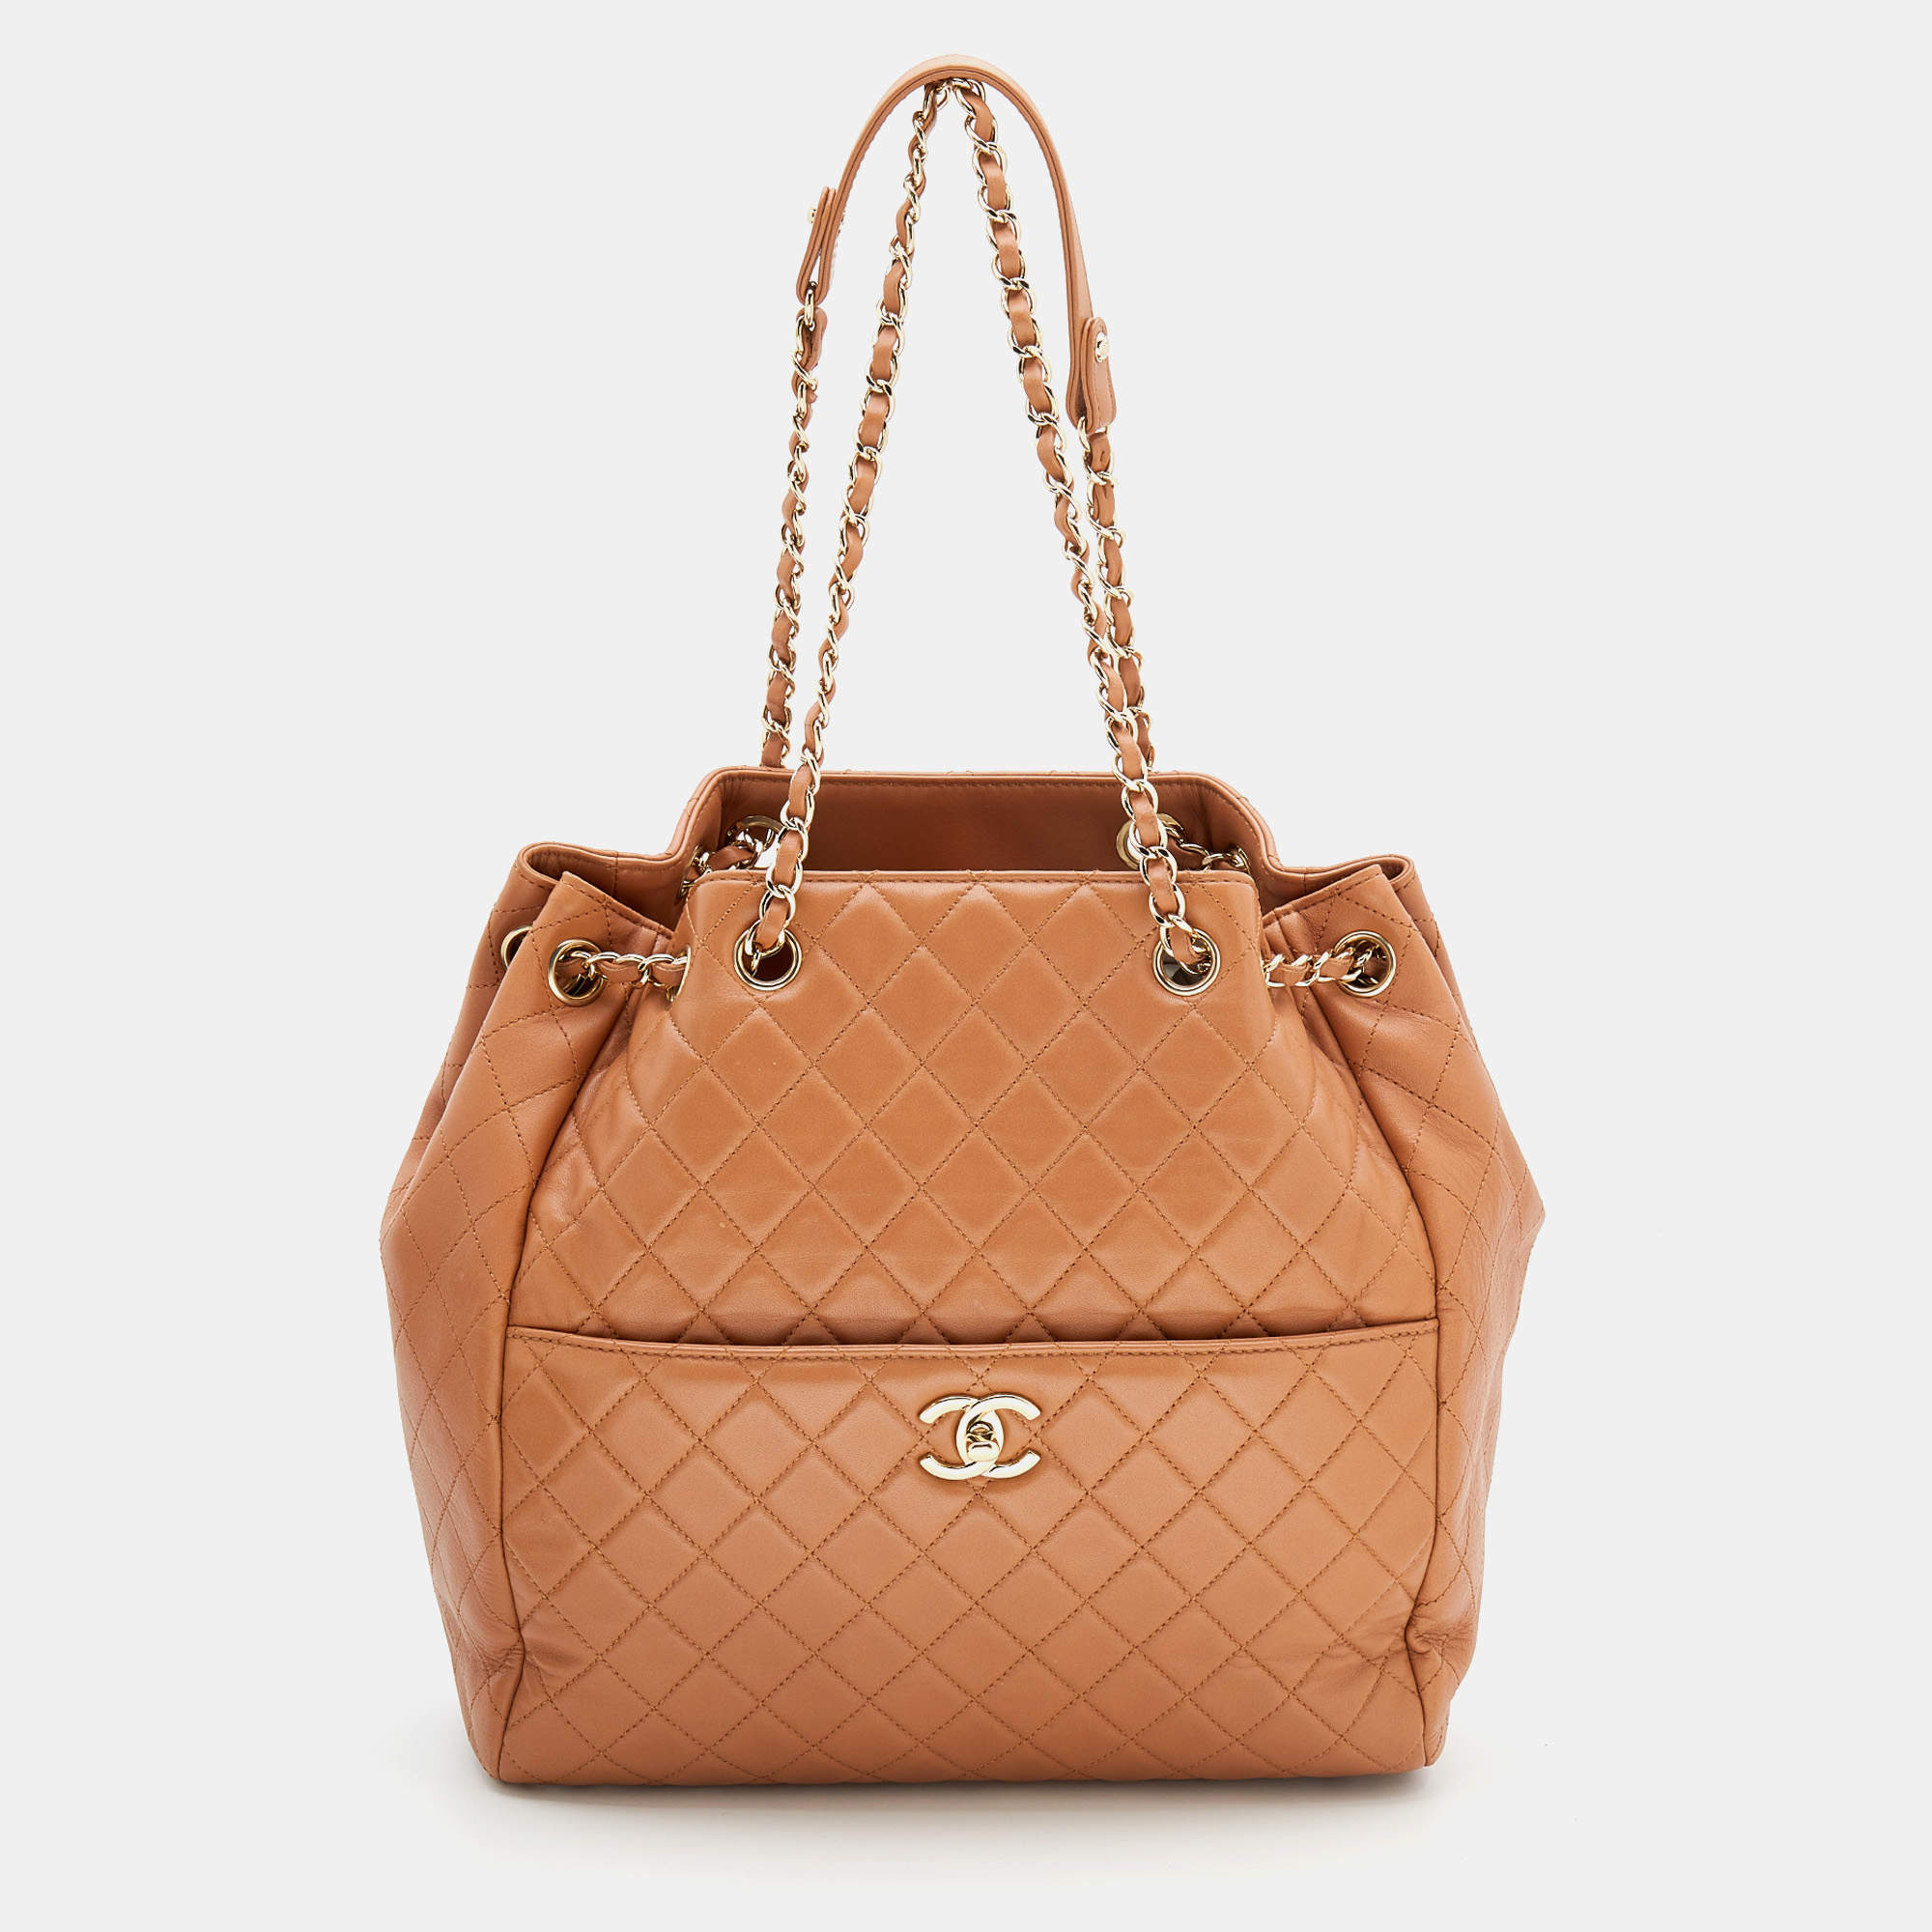 Chanel Bucket Tote Bags for Women